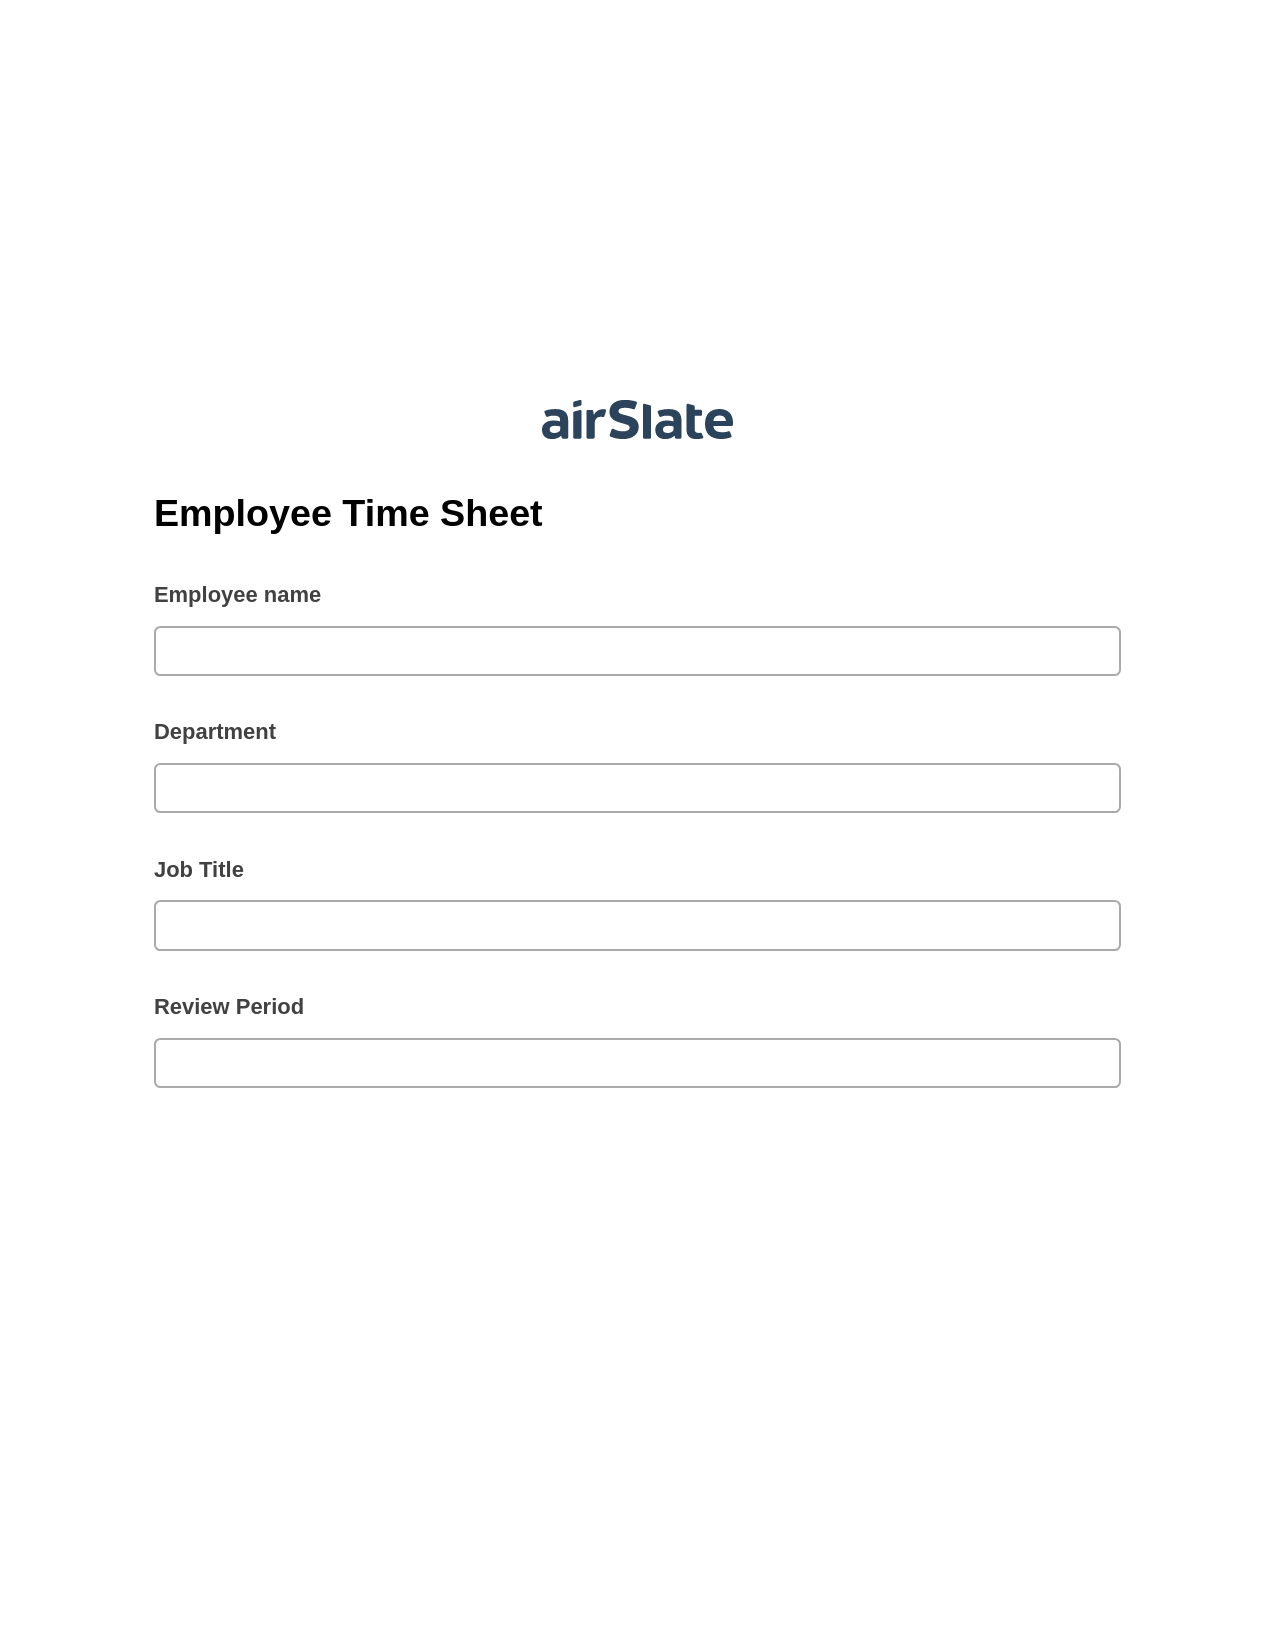 Employee Time Sheet Pre-fill from Office 365 Excel Bot, Update Audit Trail Bot, Export to WebMerge Bot